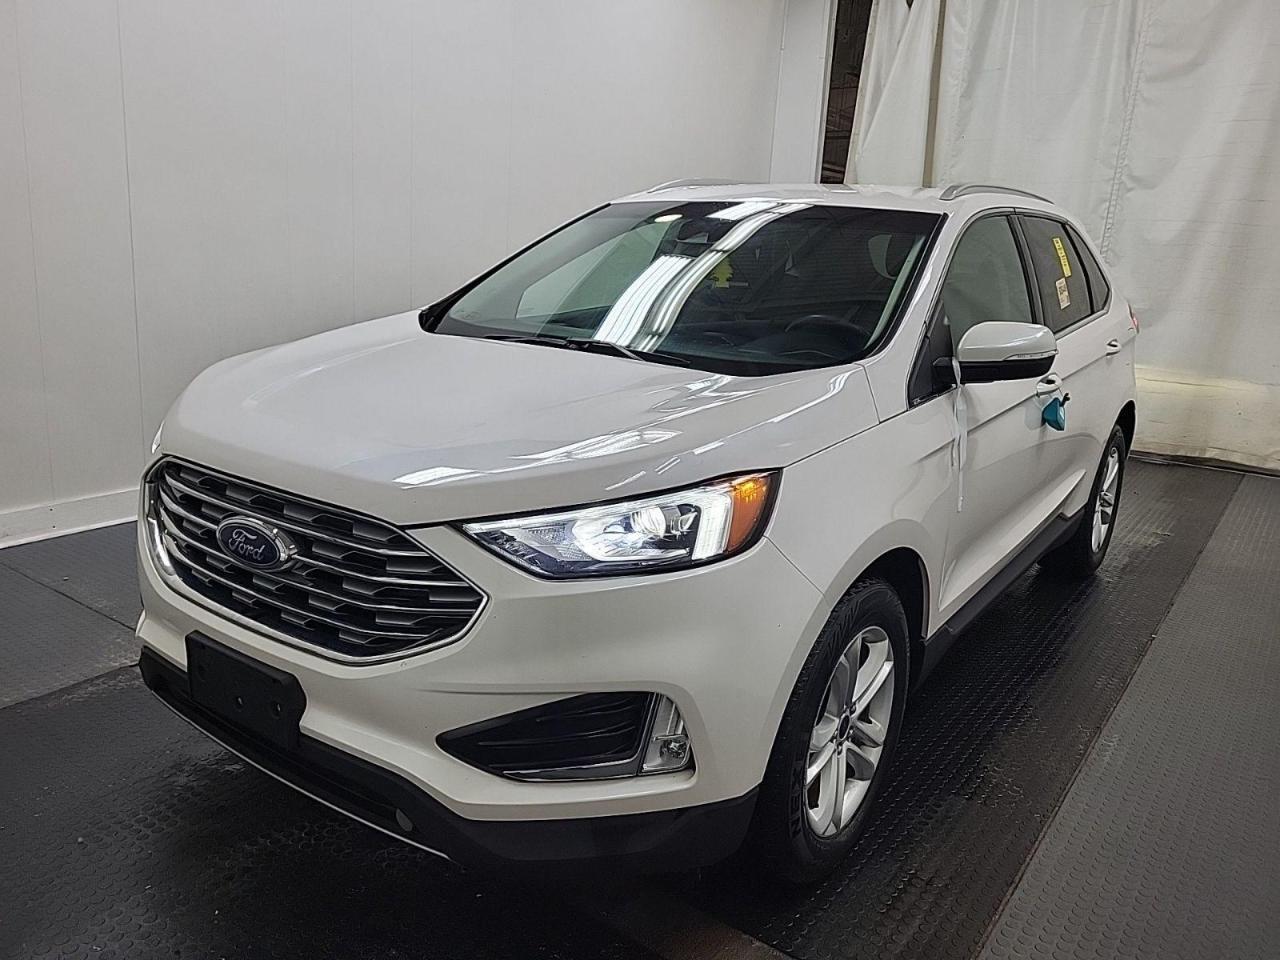 2019 Ford Edge SEL AWD-LEATHER-NAVIGATION-REMOTE START-HEATED SEA